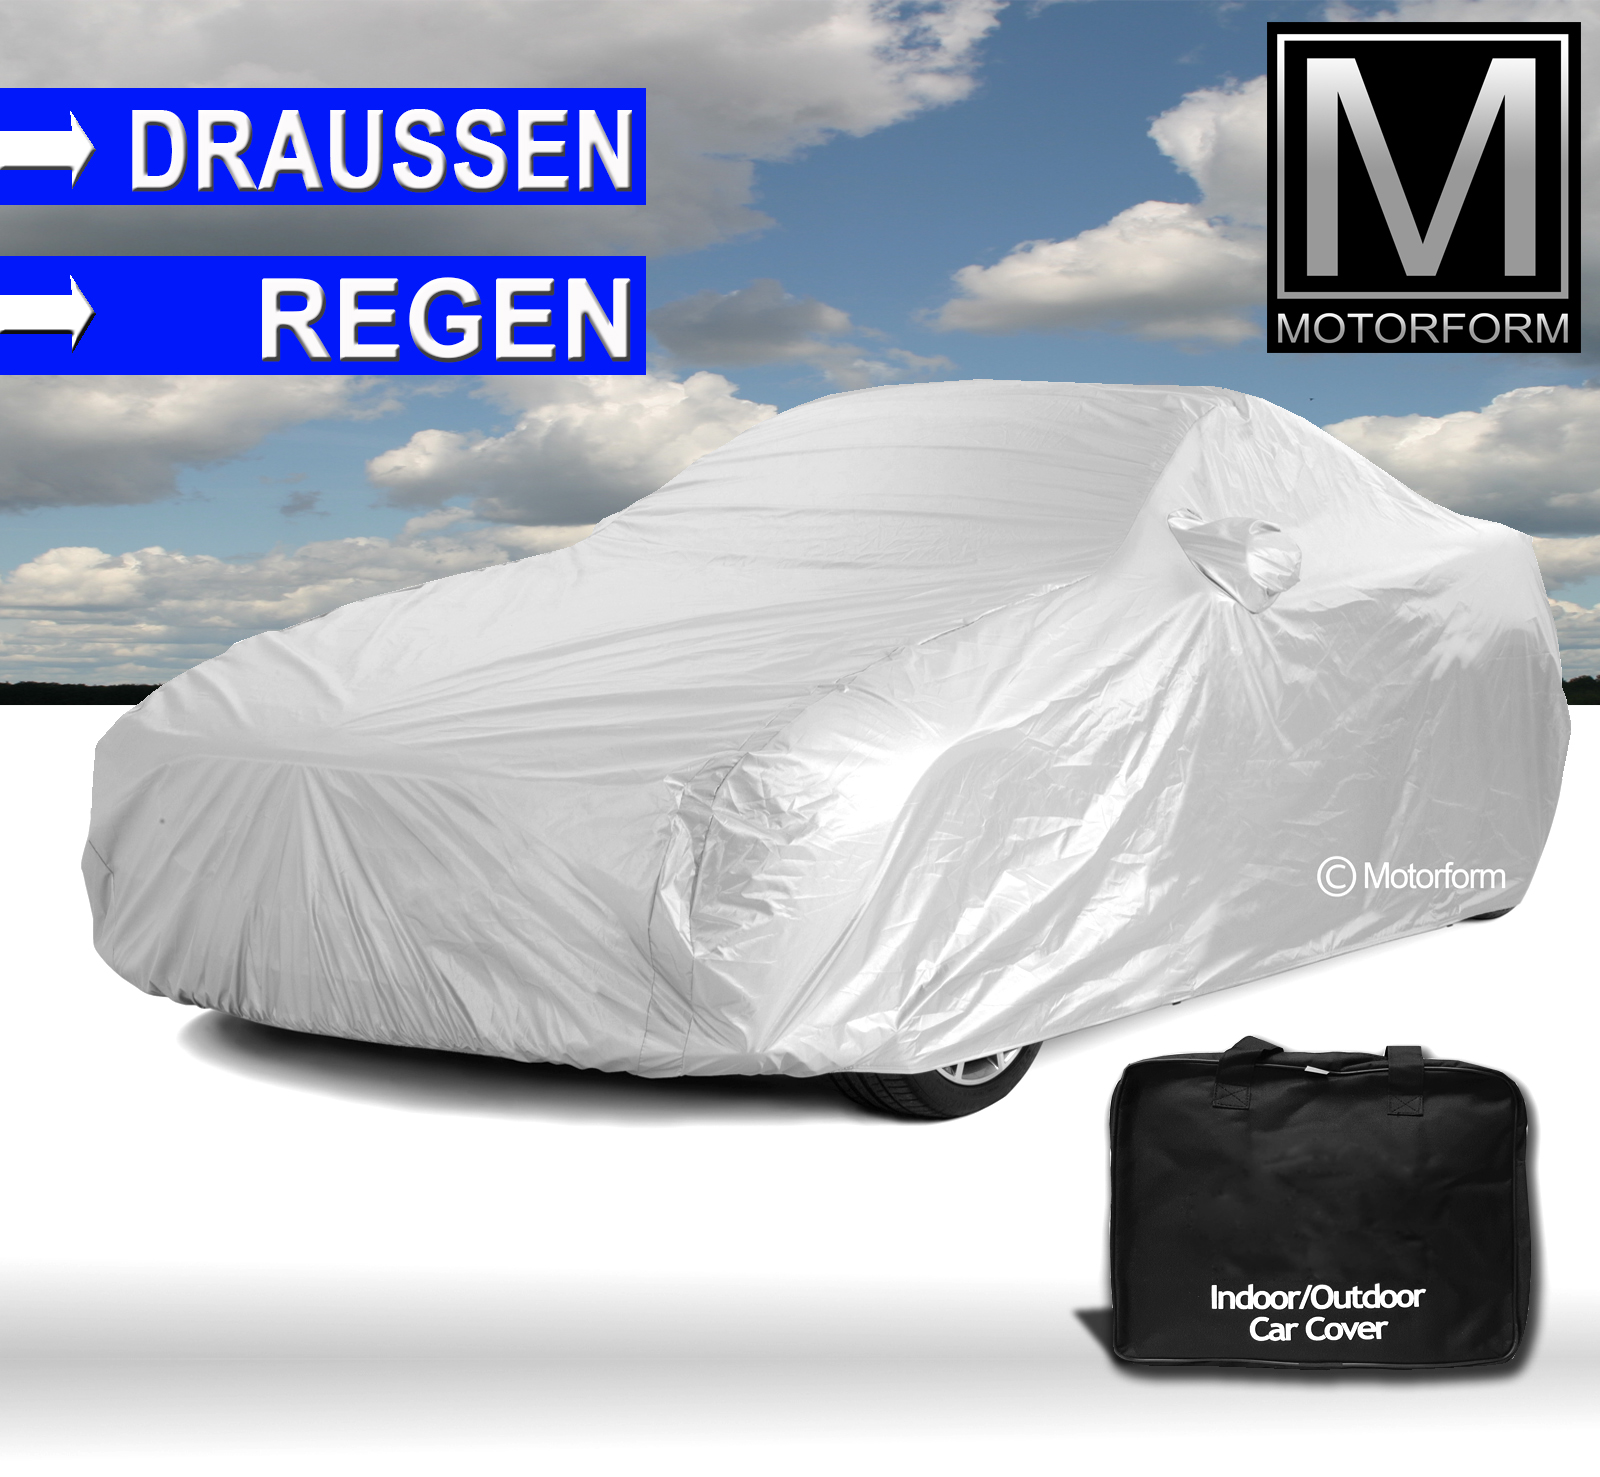 Voyager Outdoor Car Cover for Peugeot 407 Coupe